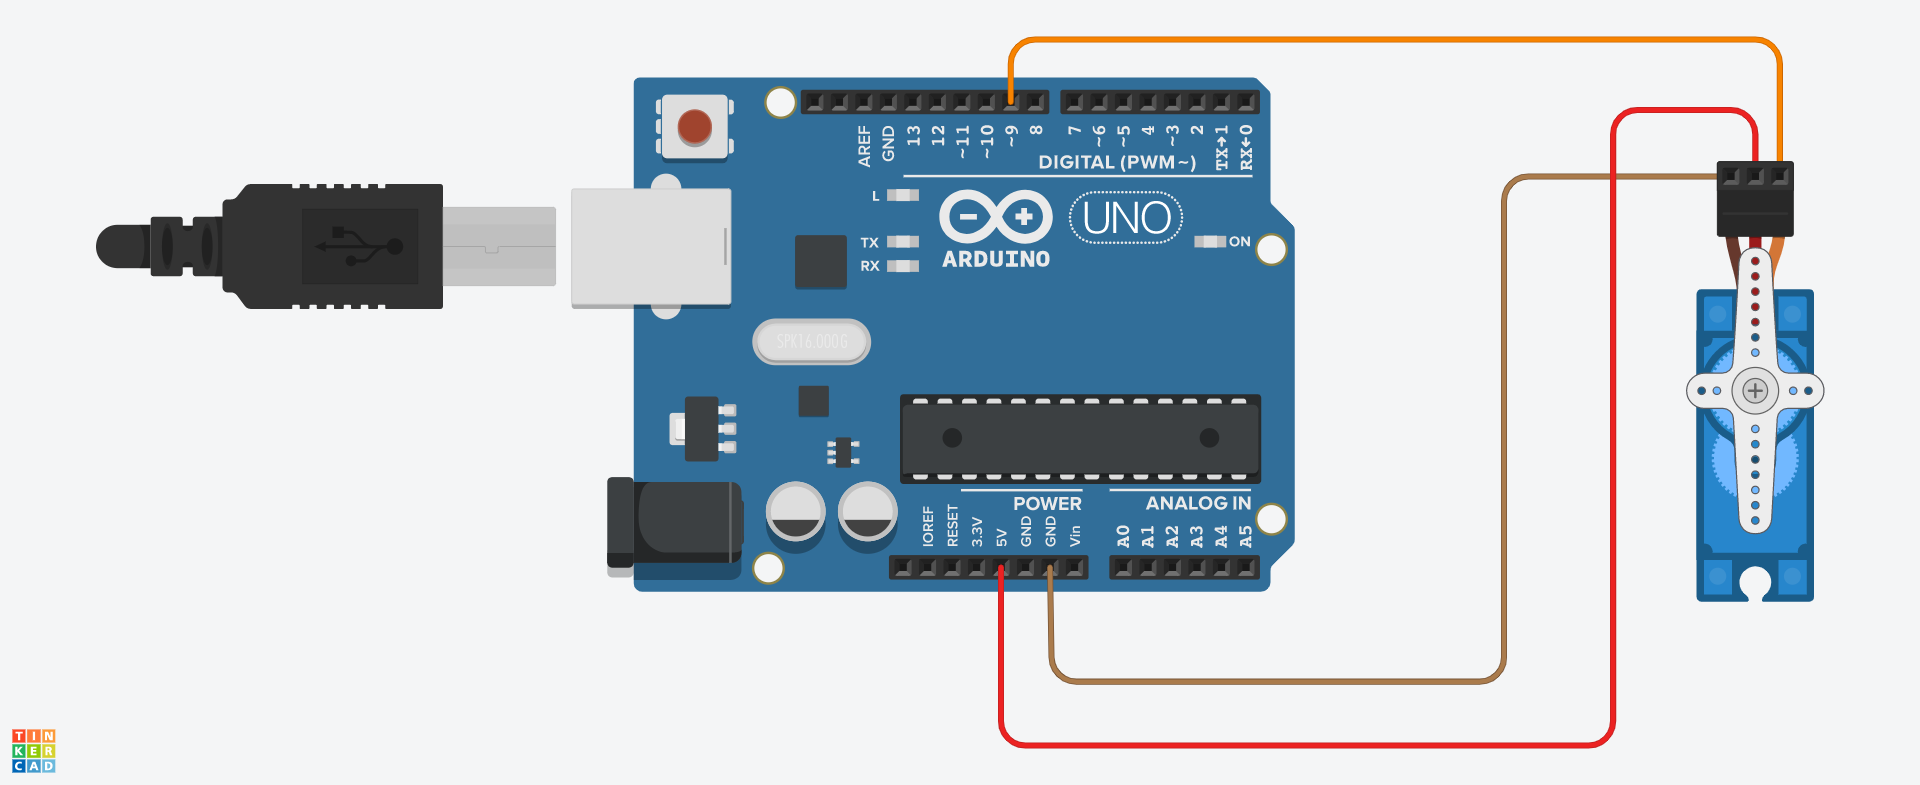 Connecting the servo to the Arduino UNO